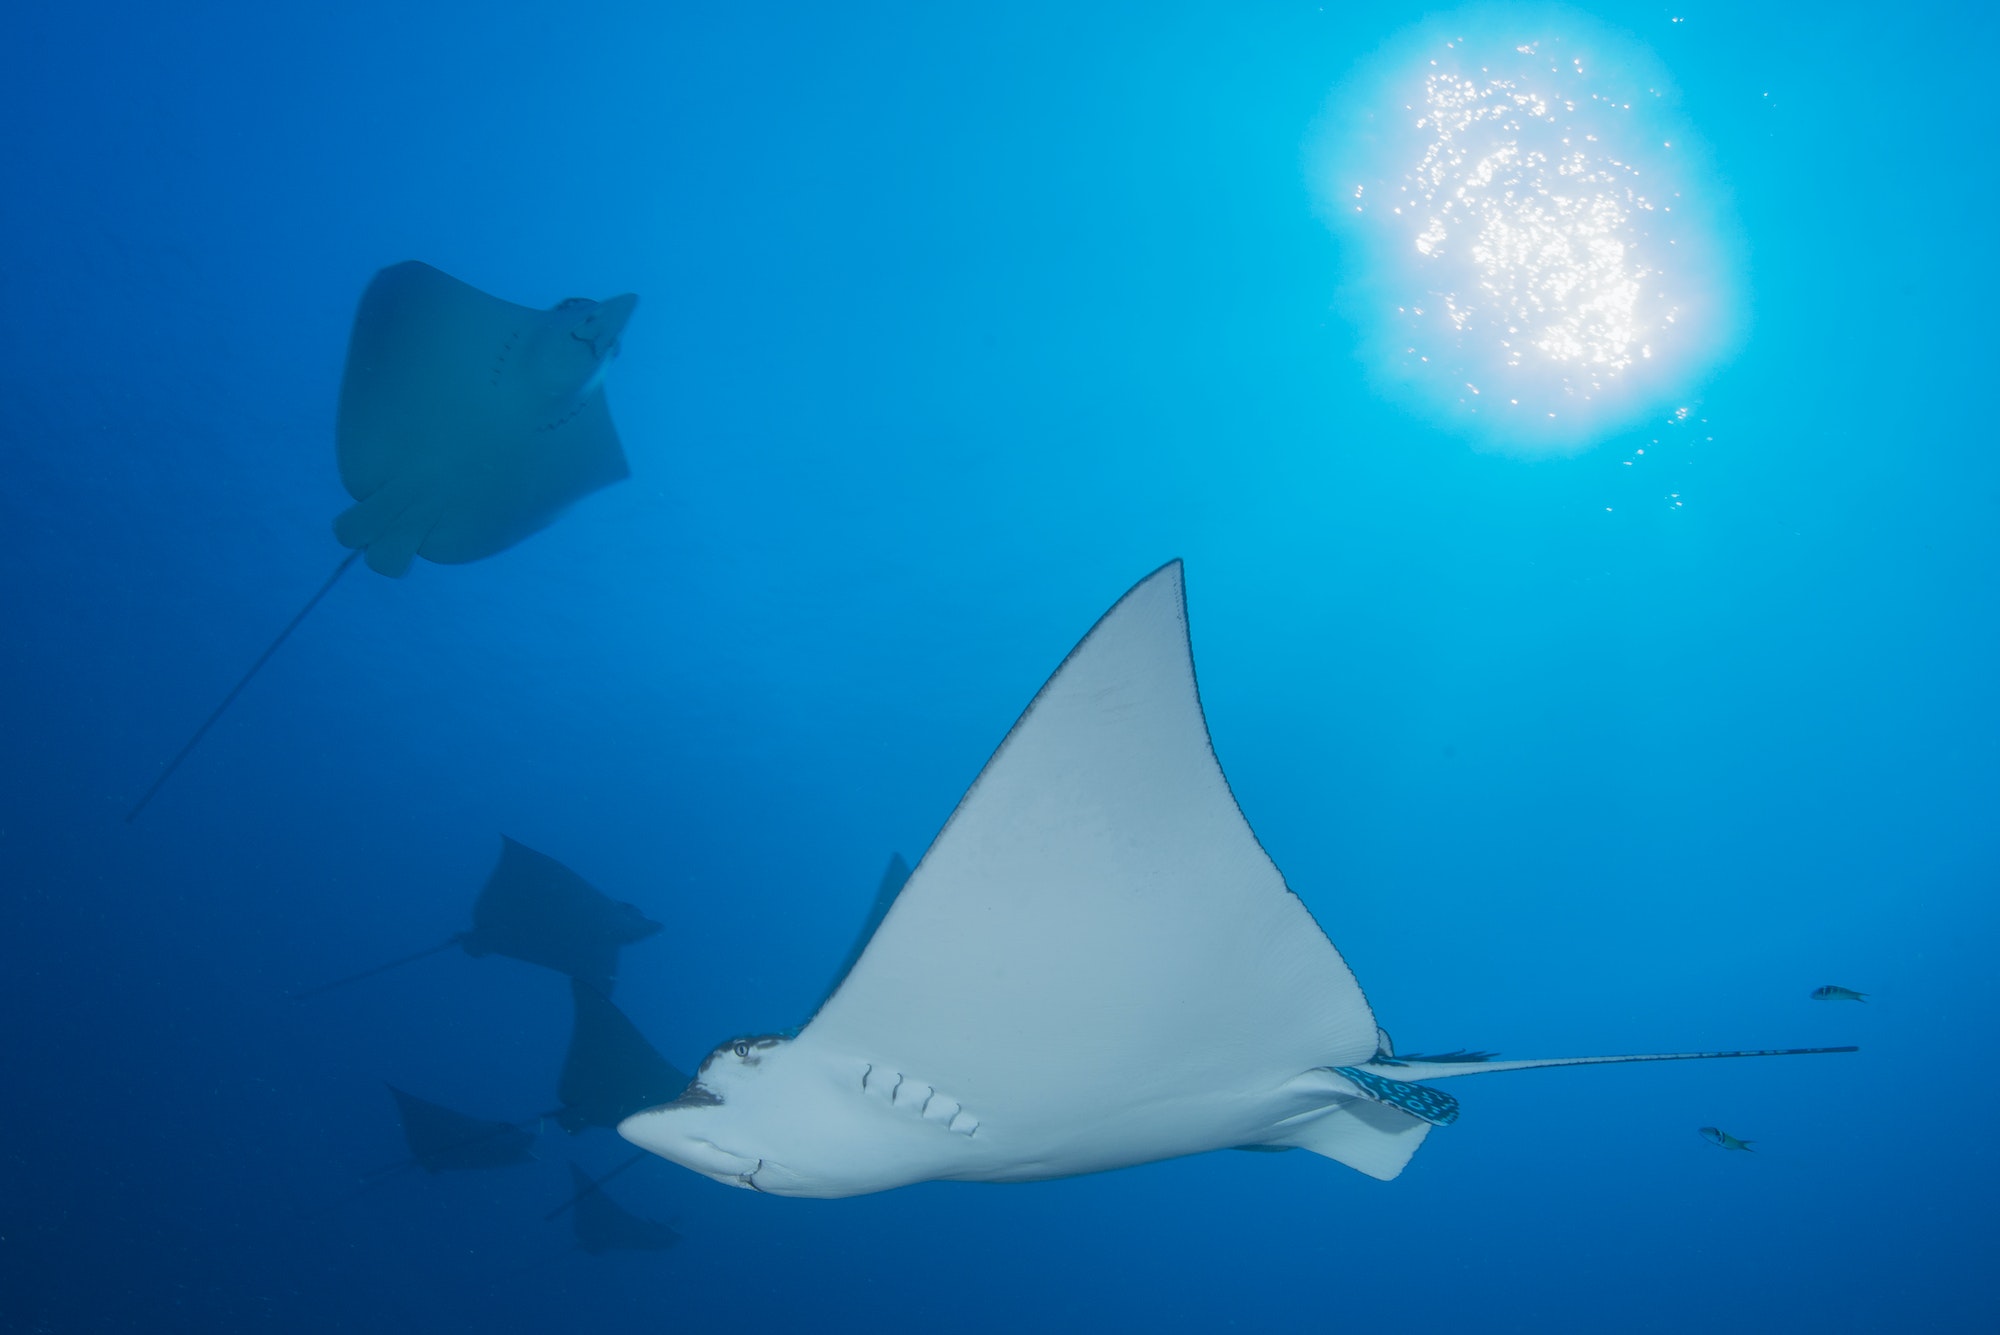 Underwater low angle view of spotted eagle ray (Aetobatus narinari), Cancun, Mexico